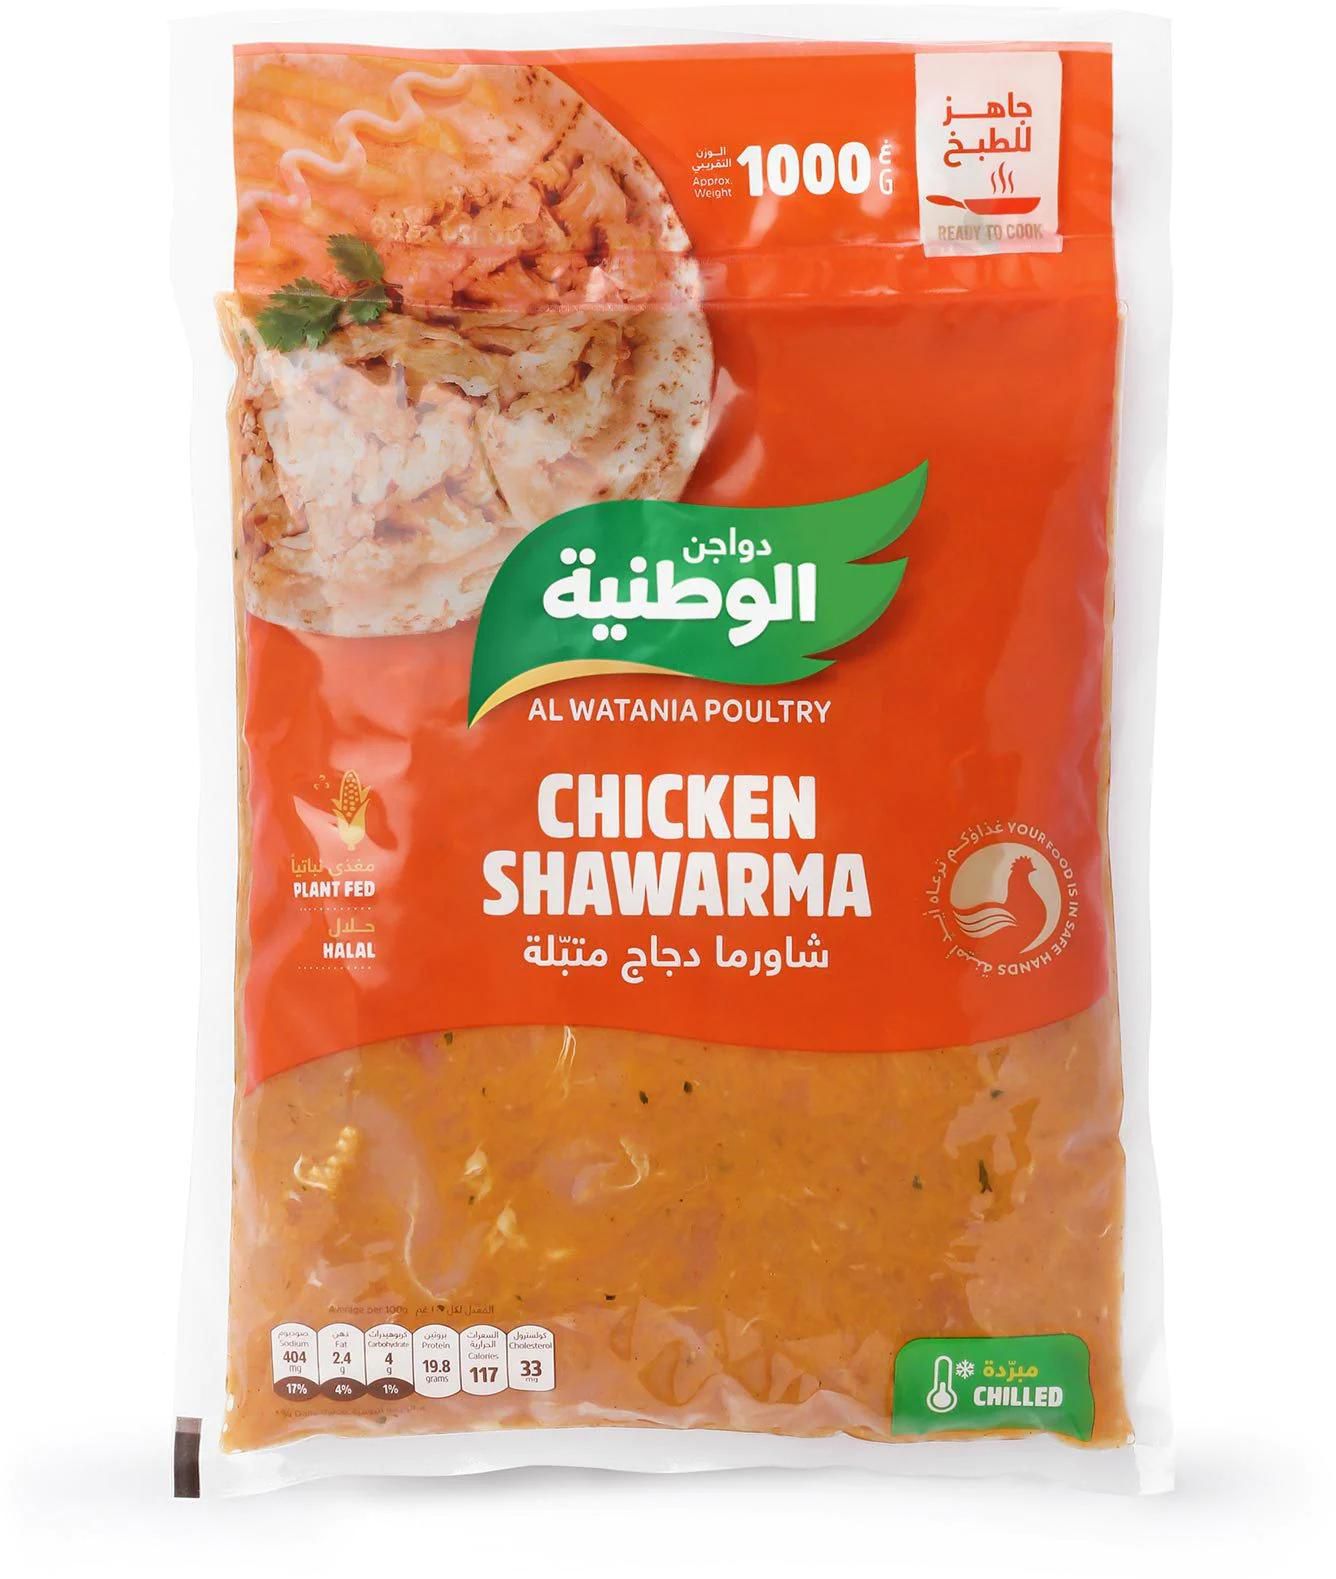 Alwatania poultry chilled marinated chicken shawarma 1000 g